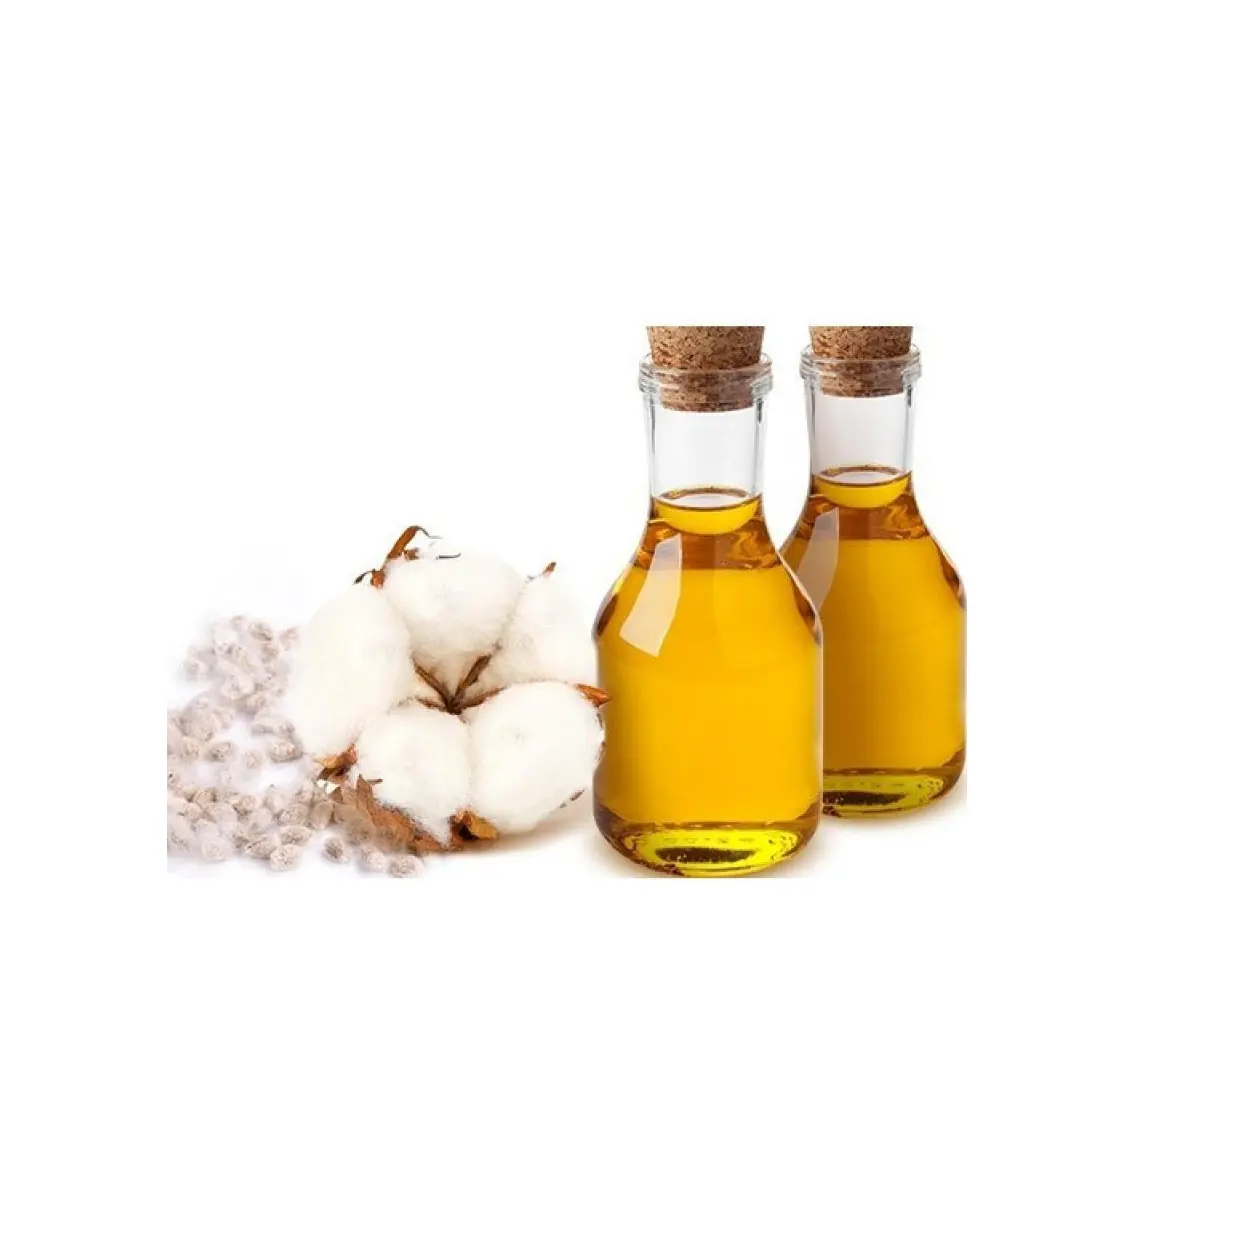 Super Export Quality Cotton Seed Oil Customized Size Pack Pure Cotton Seed Oil For Sale By Indian Exporters